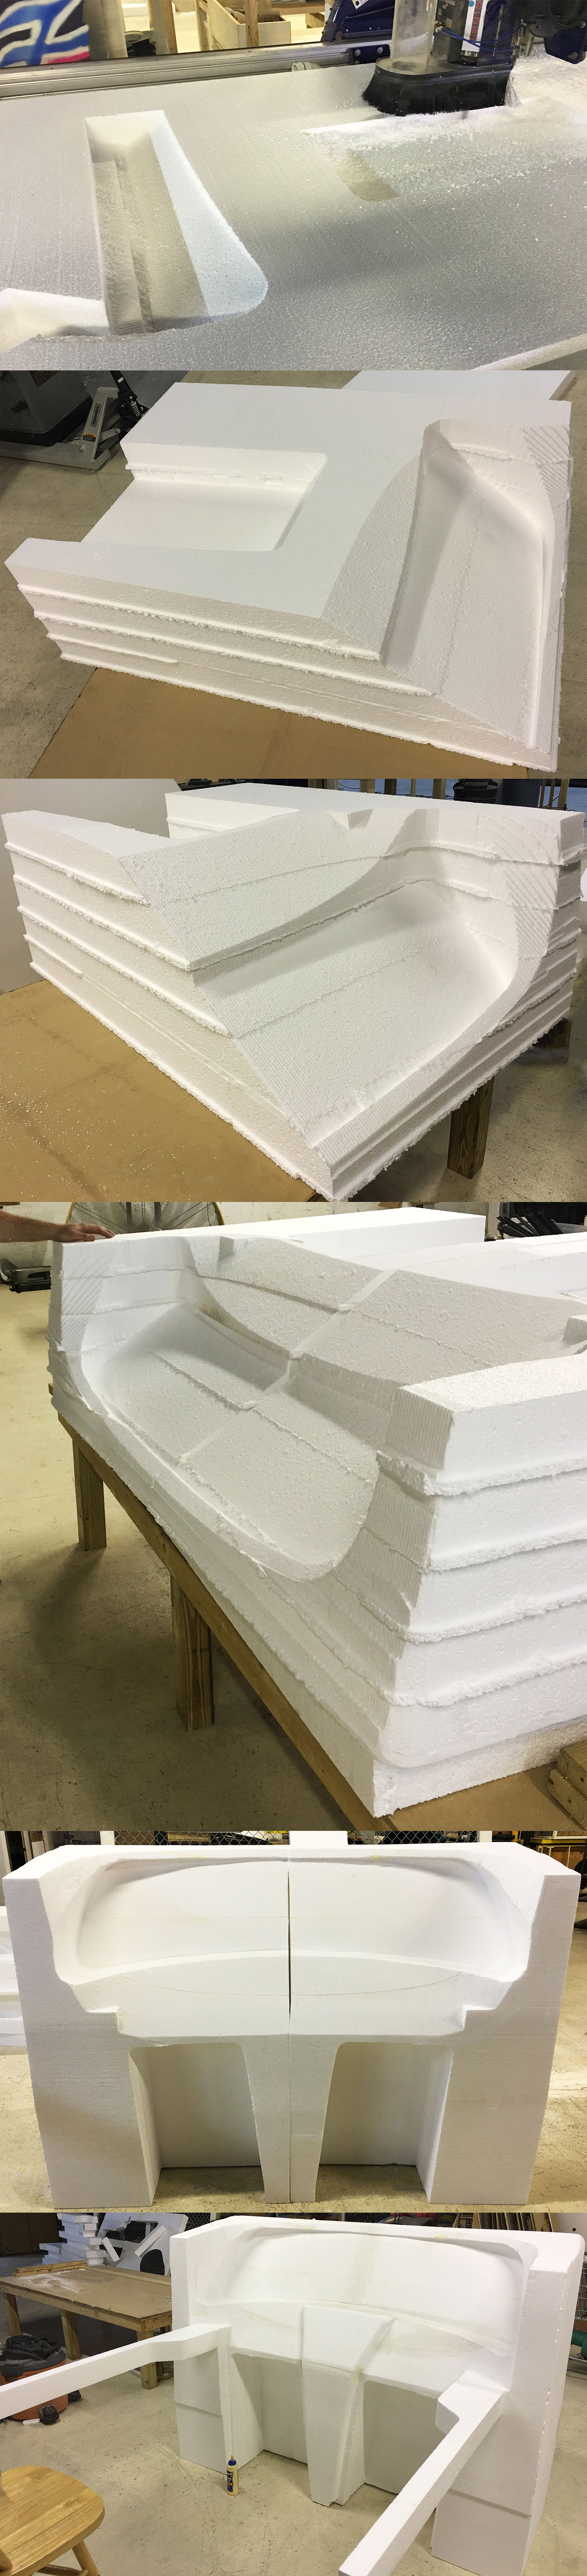 Process of creating a Styrofoam mold for a boat windshield..